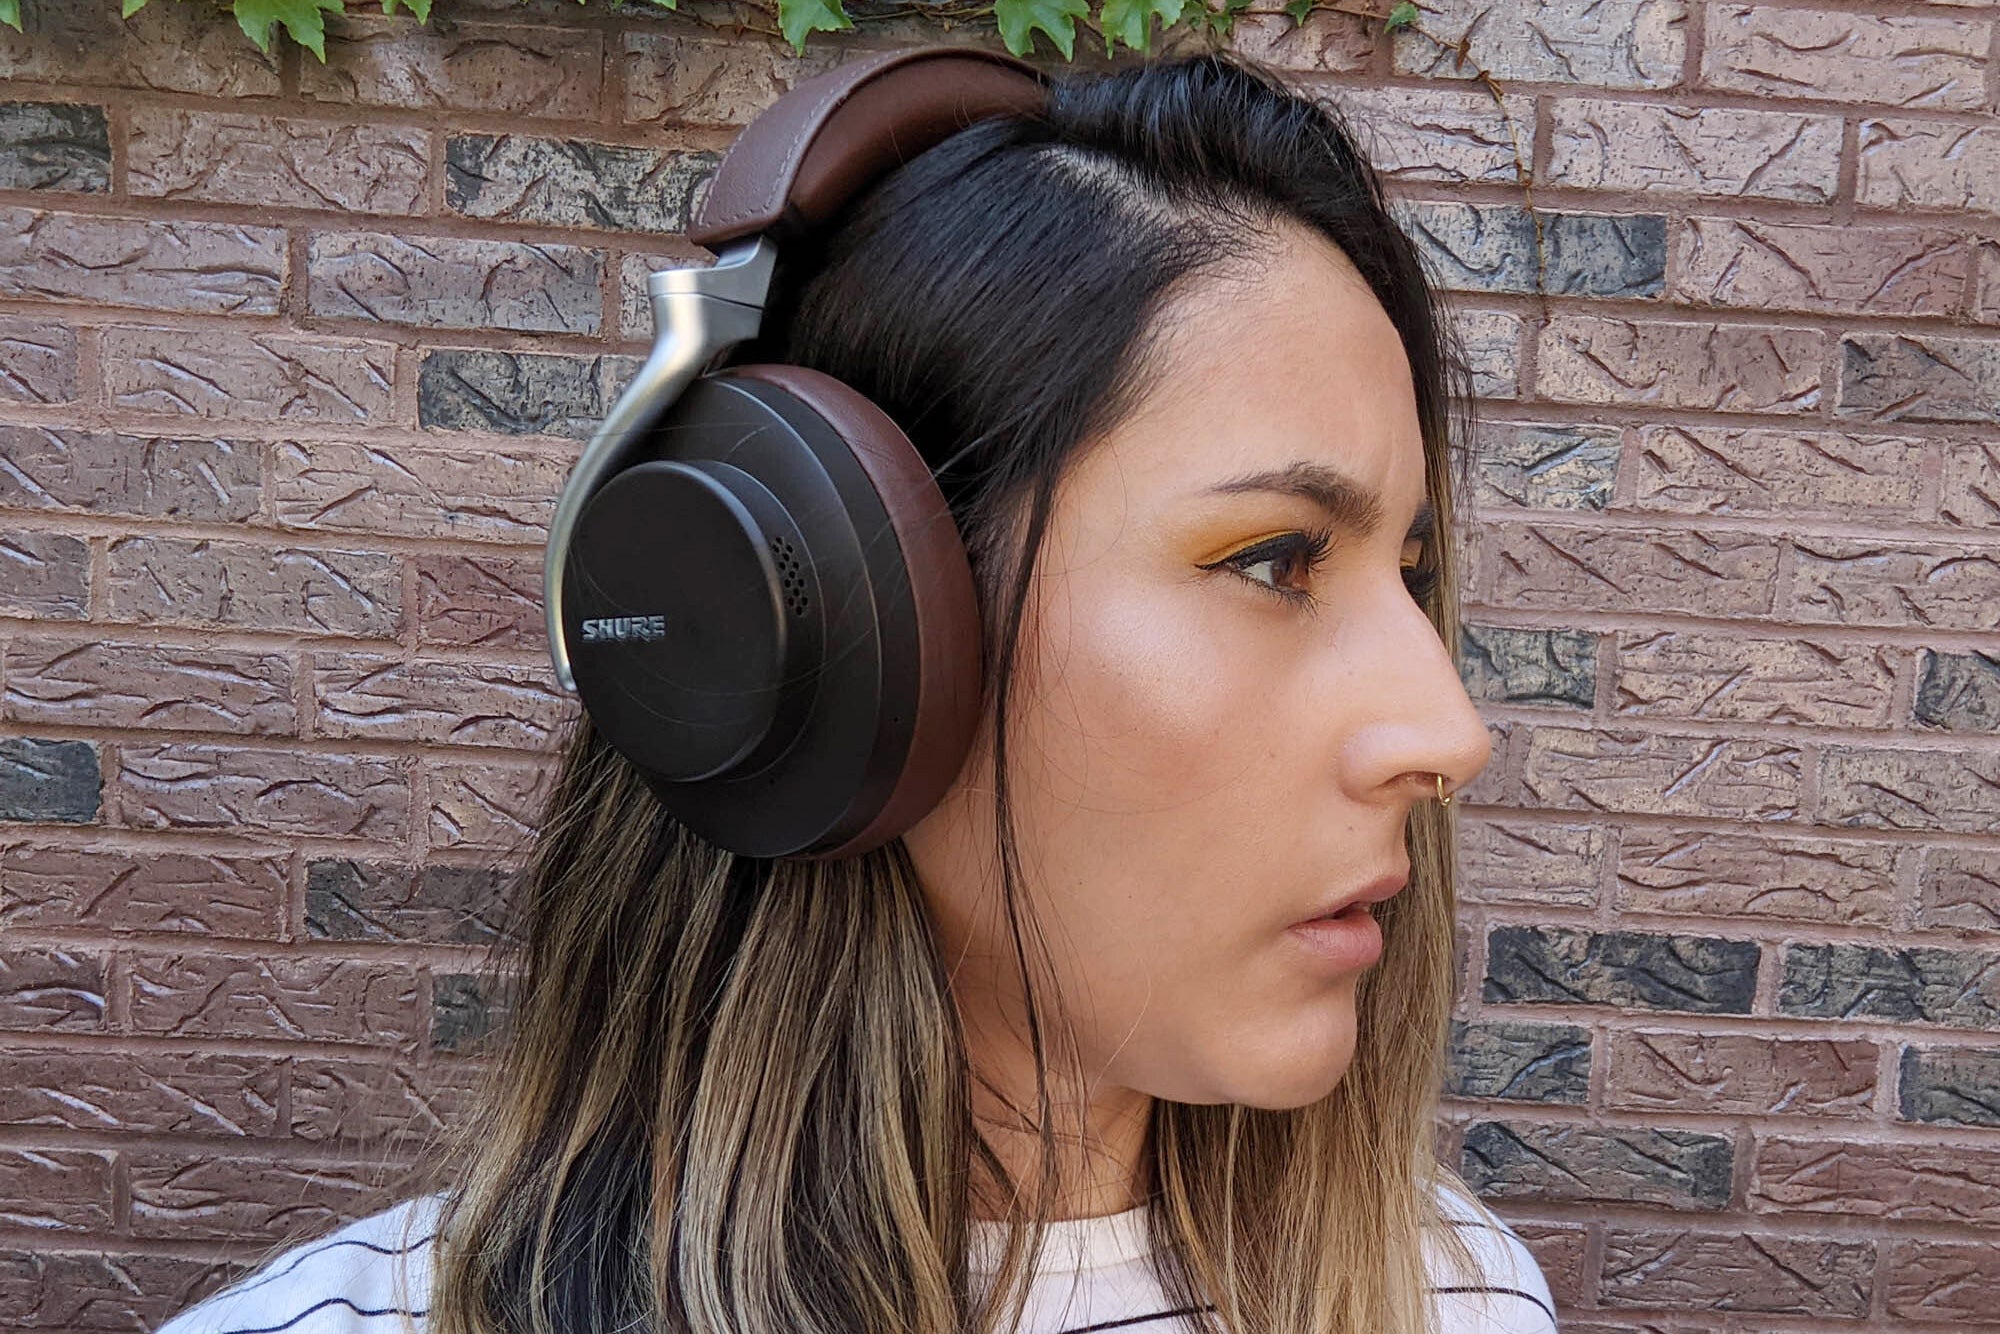 Shure AONIC 50 review: Wired & wireless headphones | Popular Science